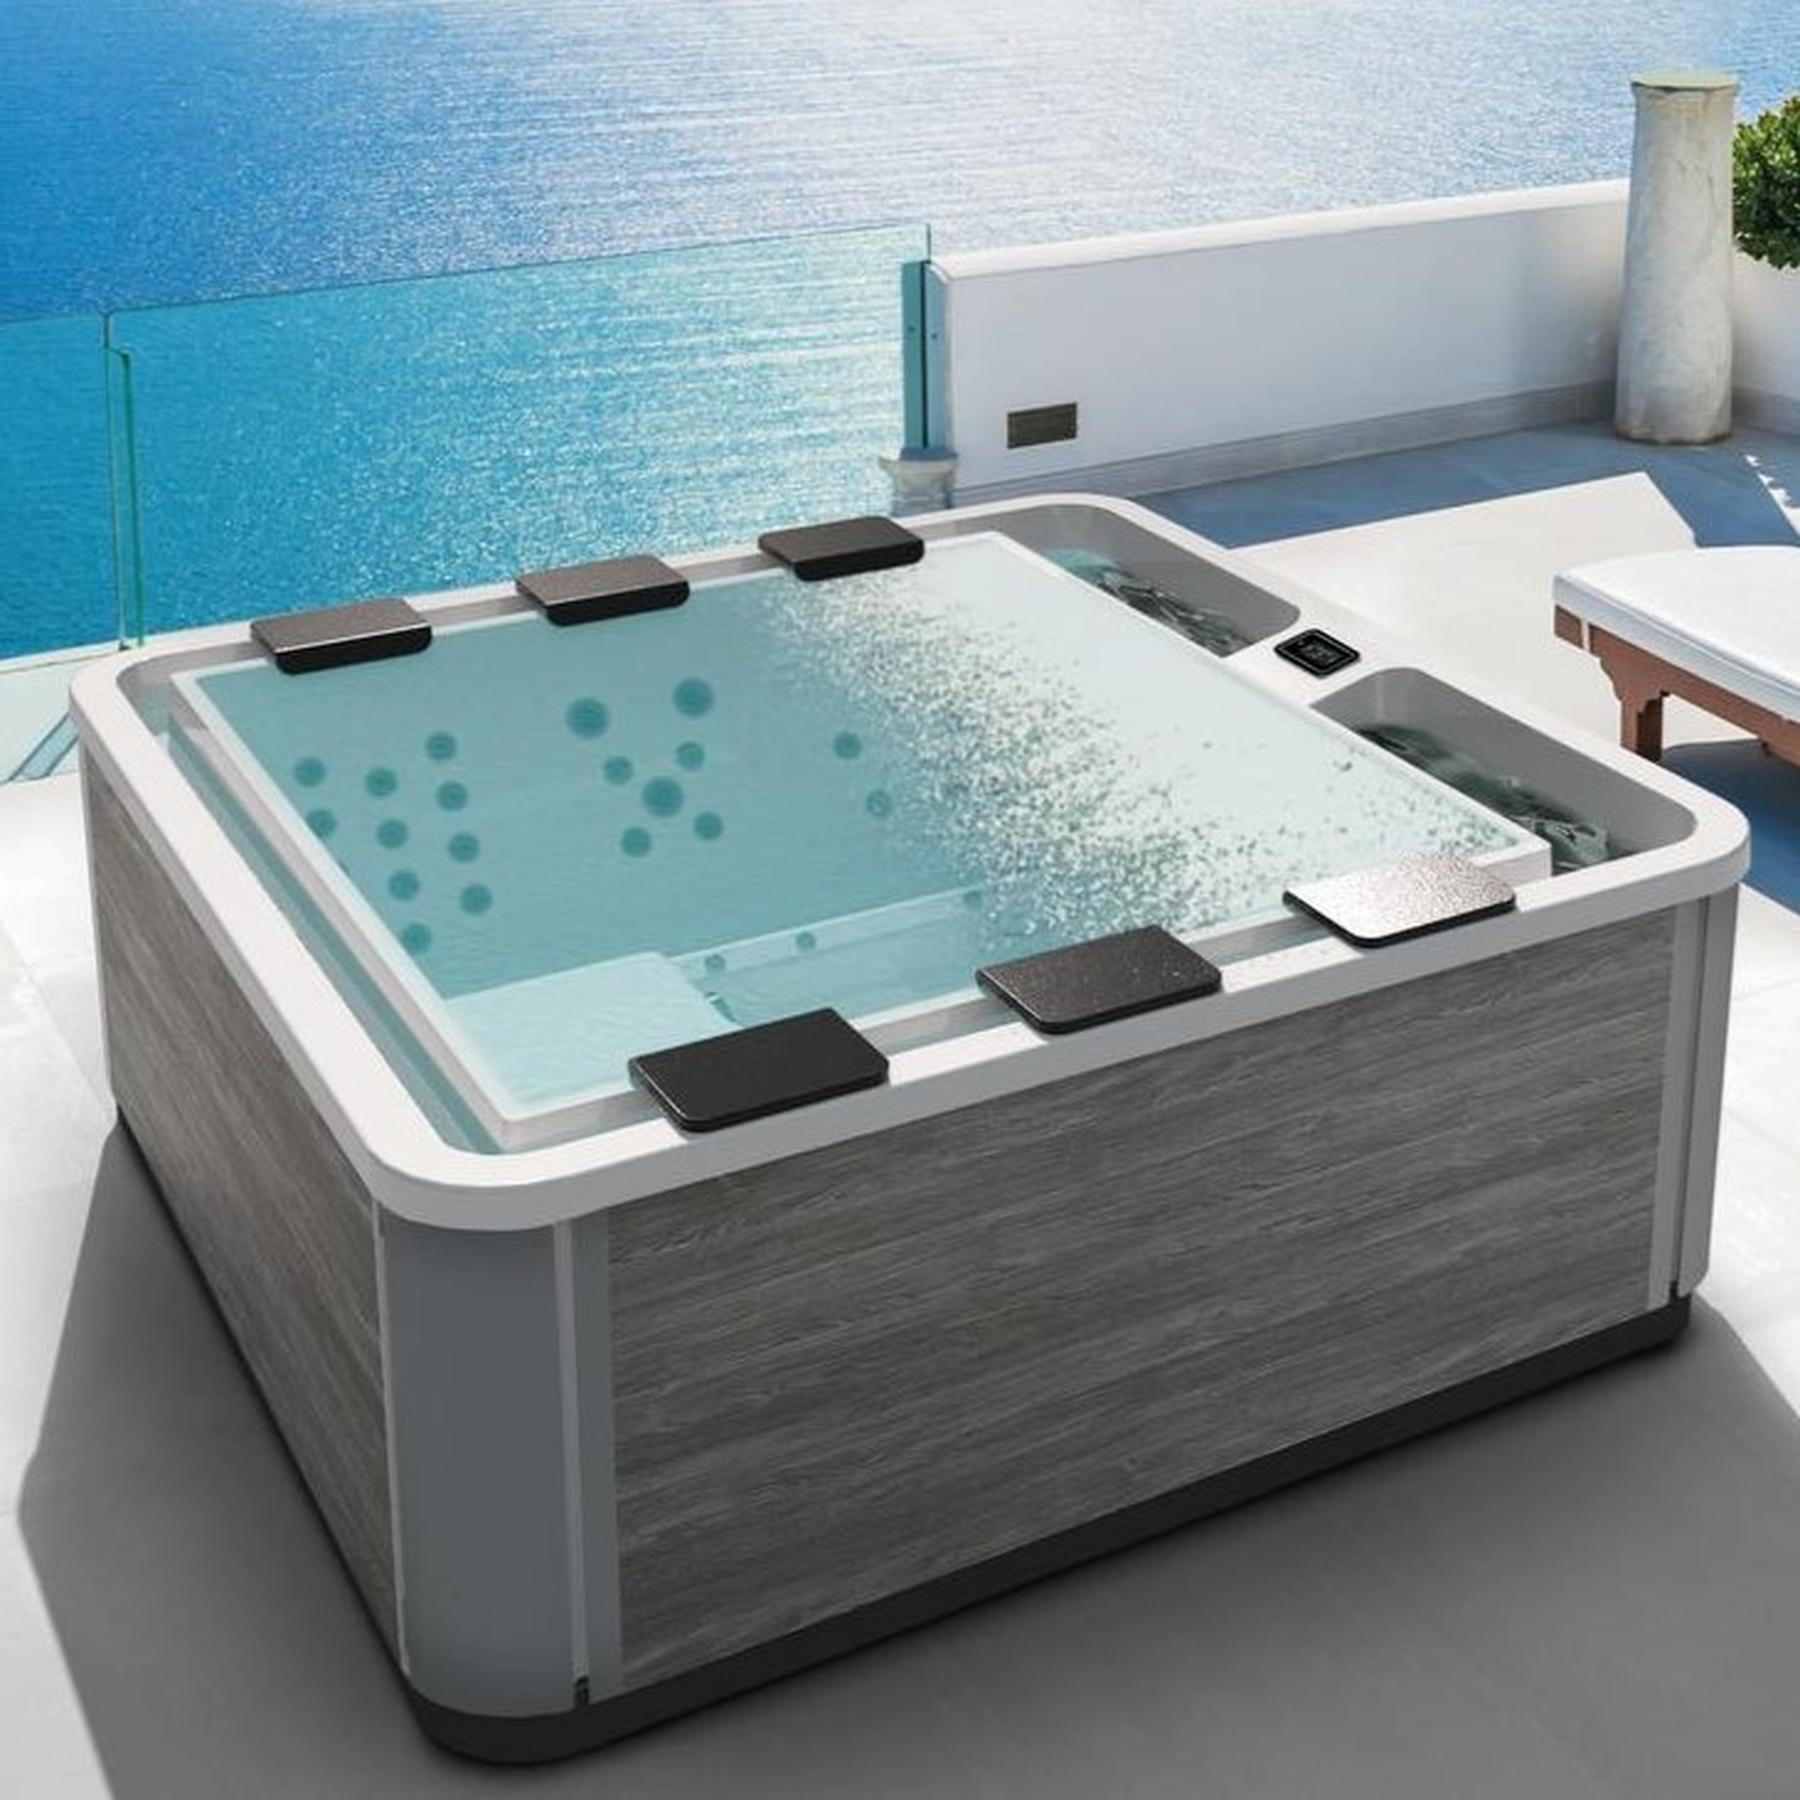 Spa A700 5 Places Blanc Relax Airturbo Tablier Inclus